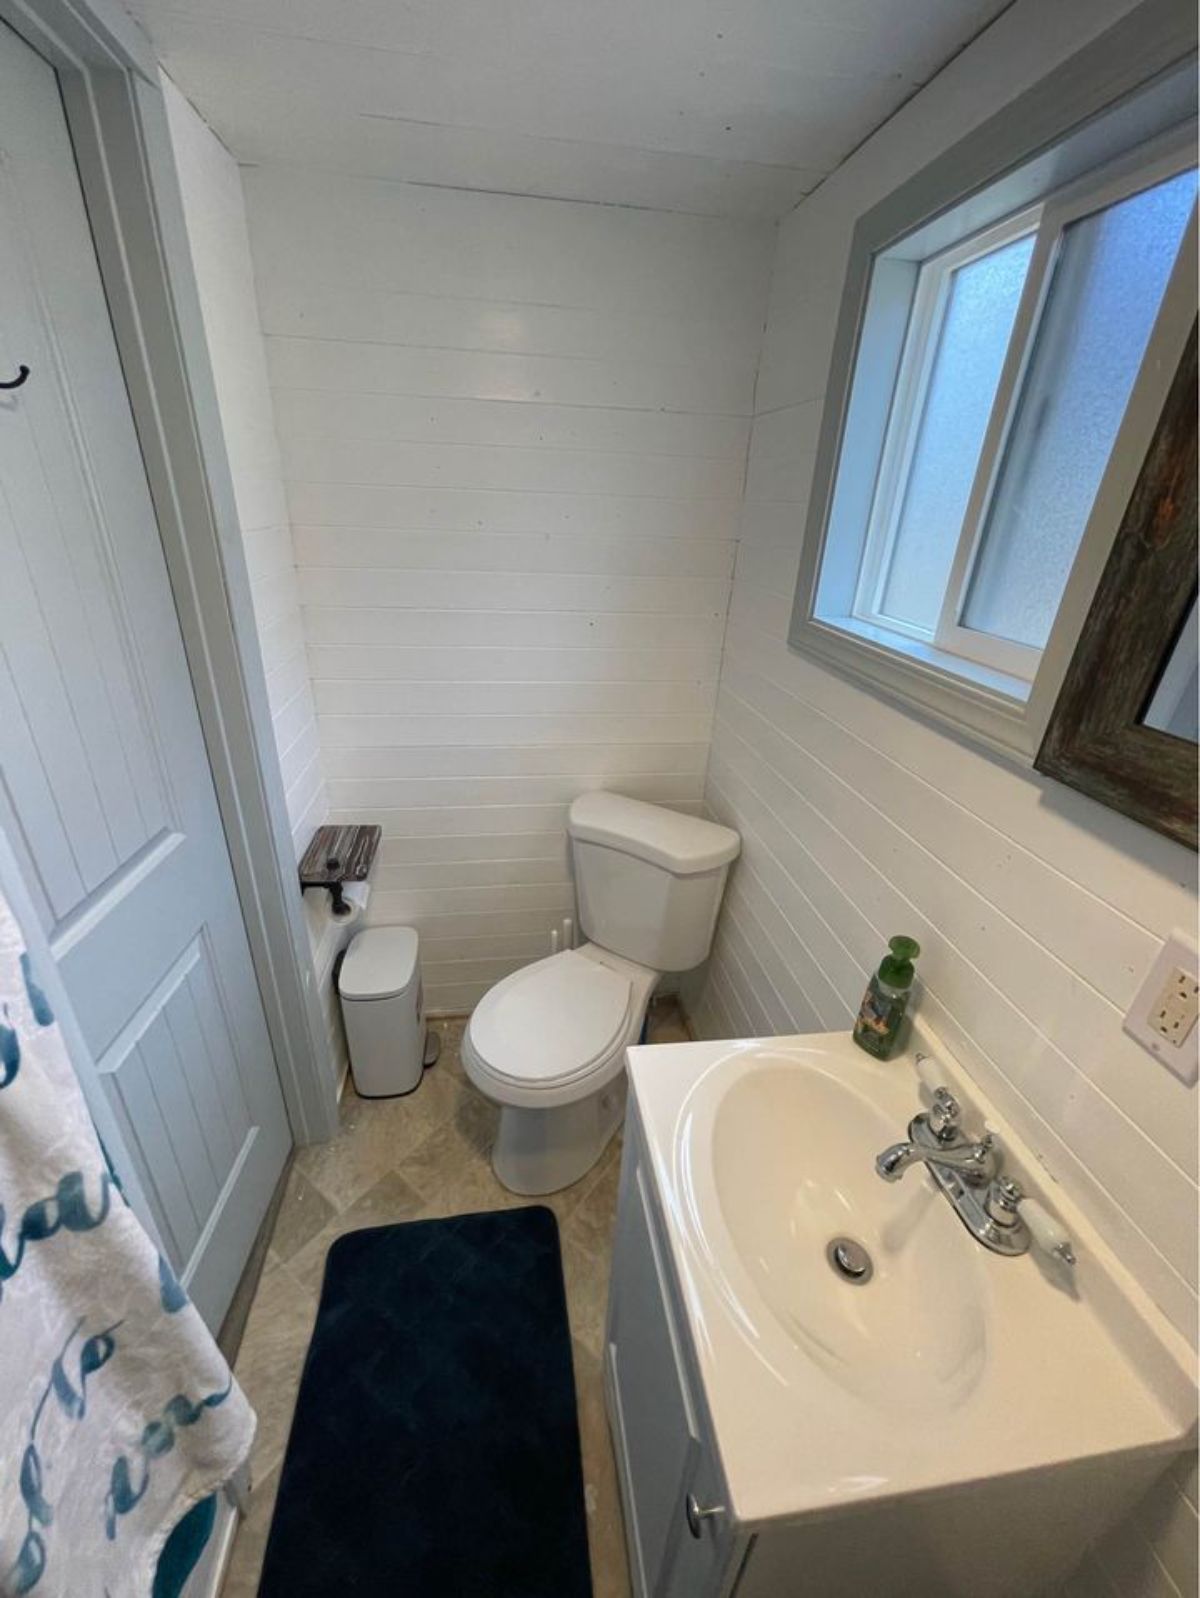 Bathroom of 24’ Turnkey Ready Tiny House has a toilet and sink with vanity